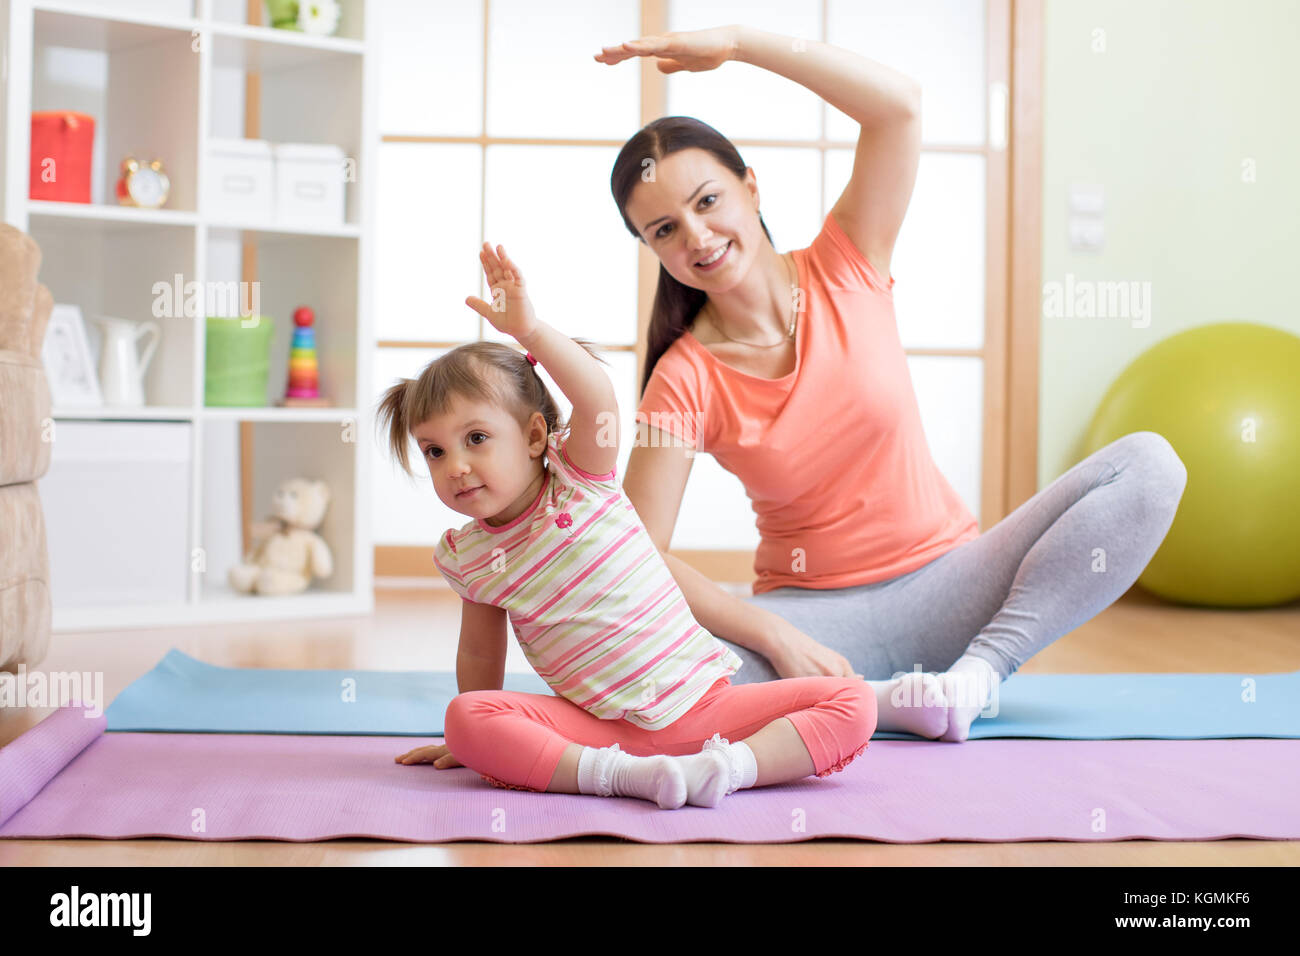 Active mother and child daughter are engaged in fitness, yoga, exercise at home Stock Photo